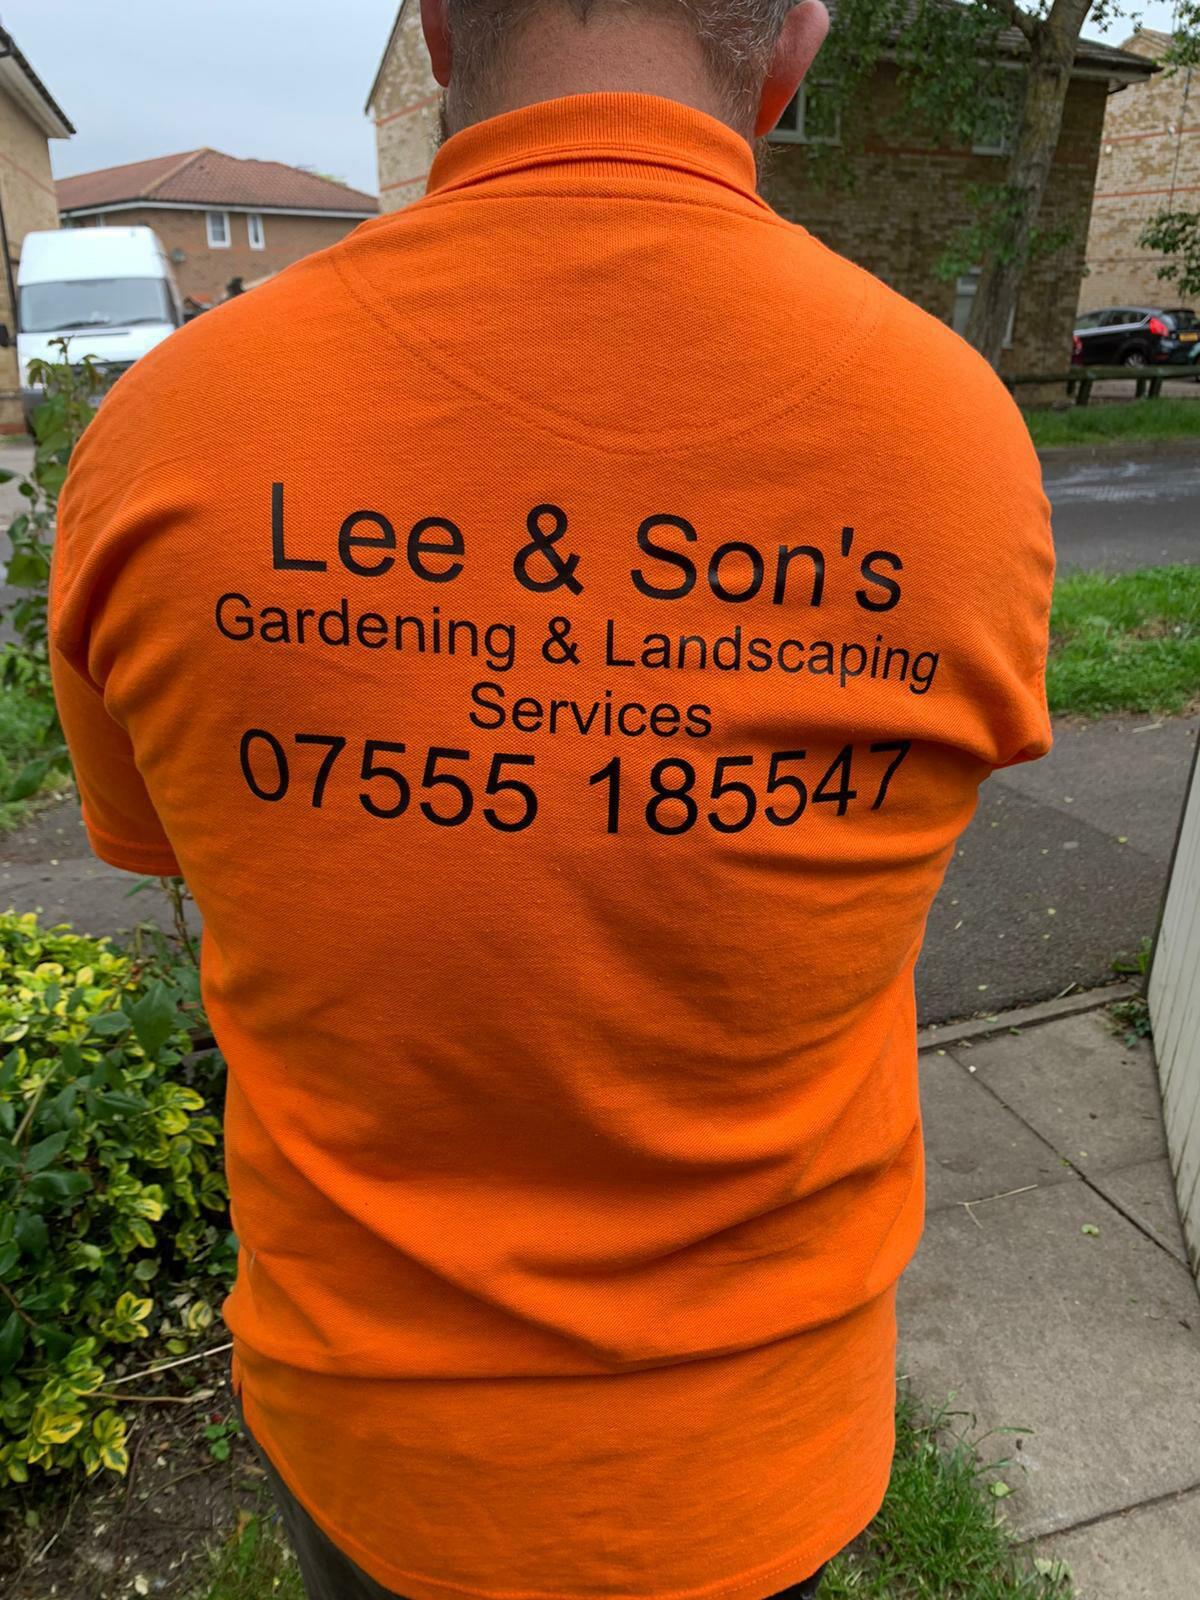 Lee And Sons Landscaping And Gardening Services - Oxford - Nextdoor